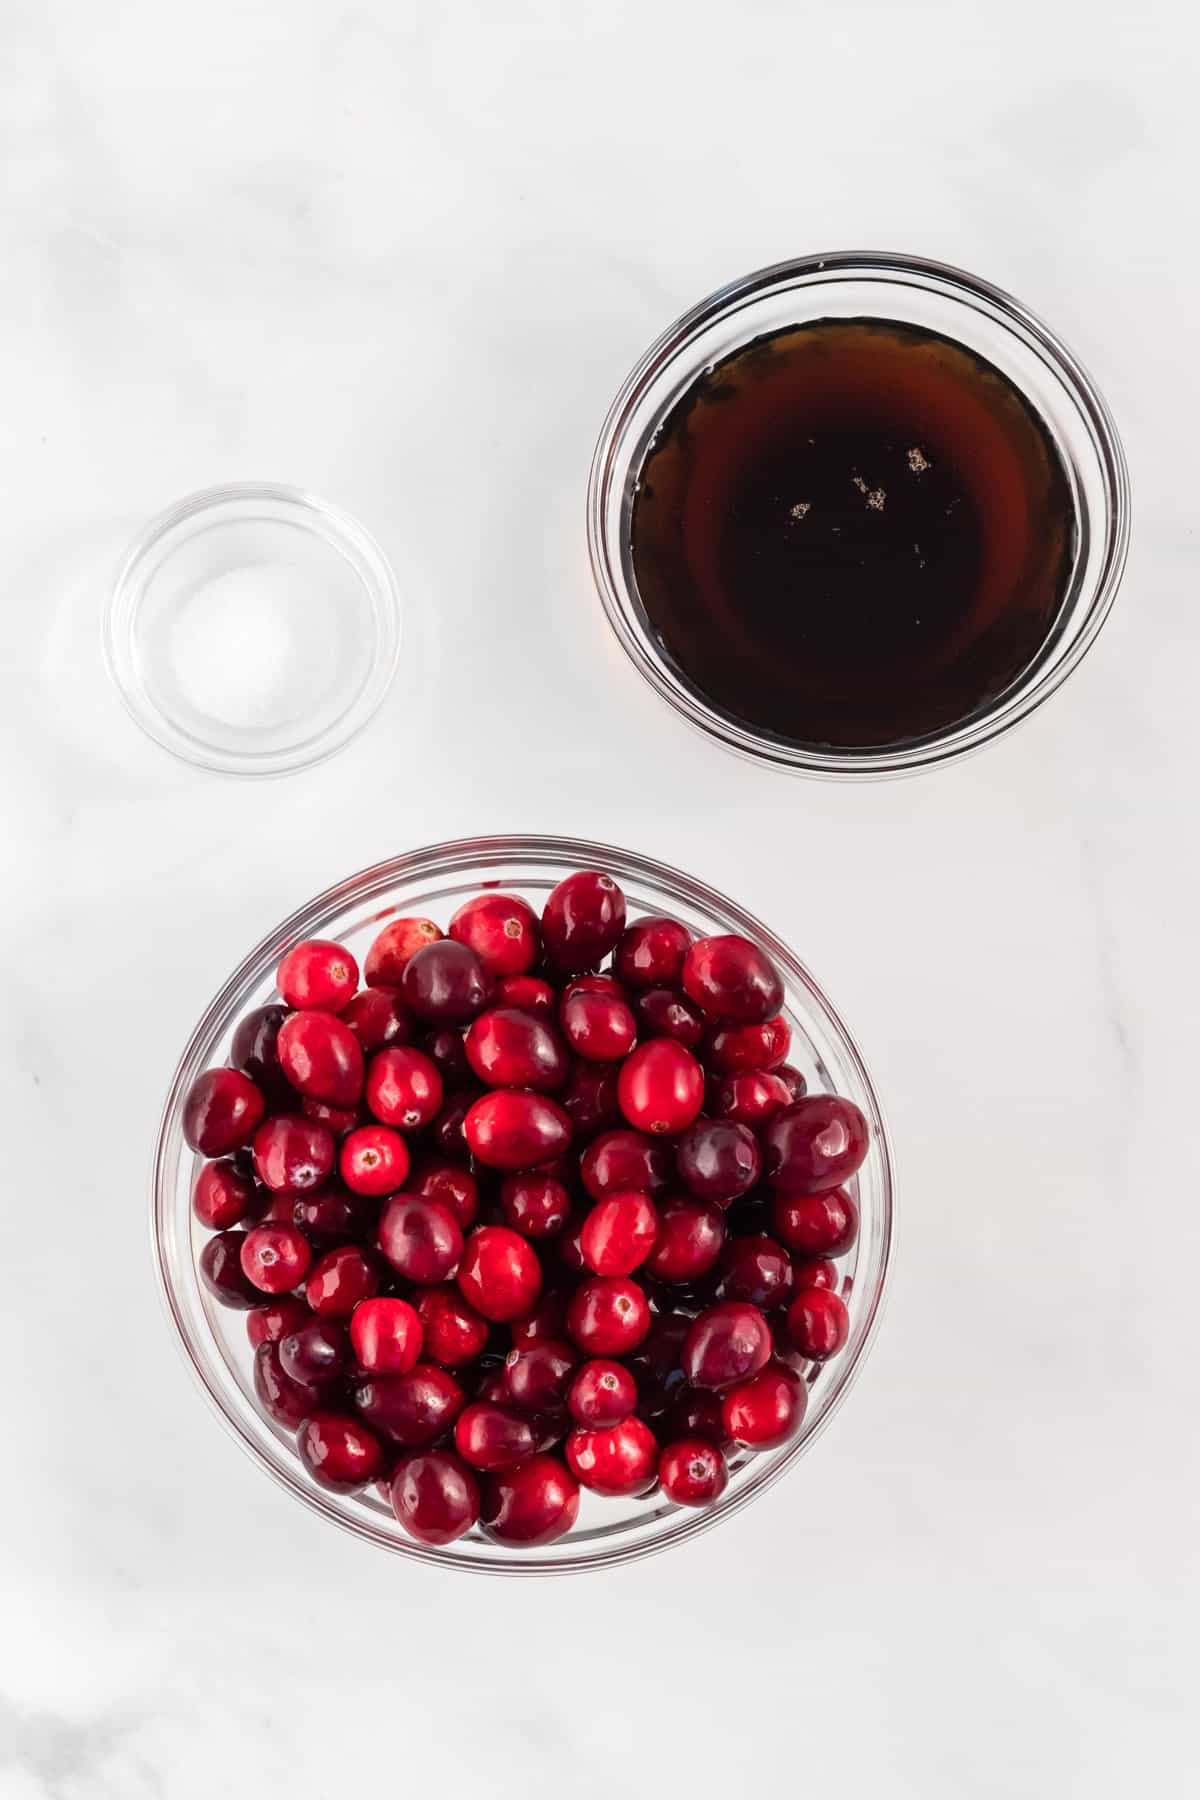 cranberries, salt, and maple syrup in bowls